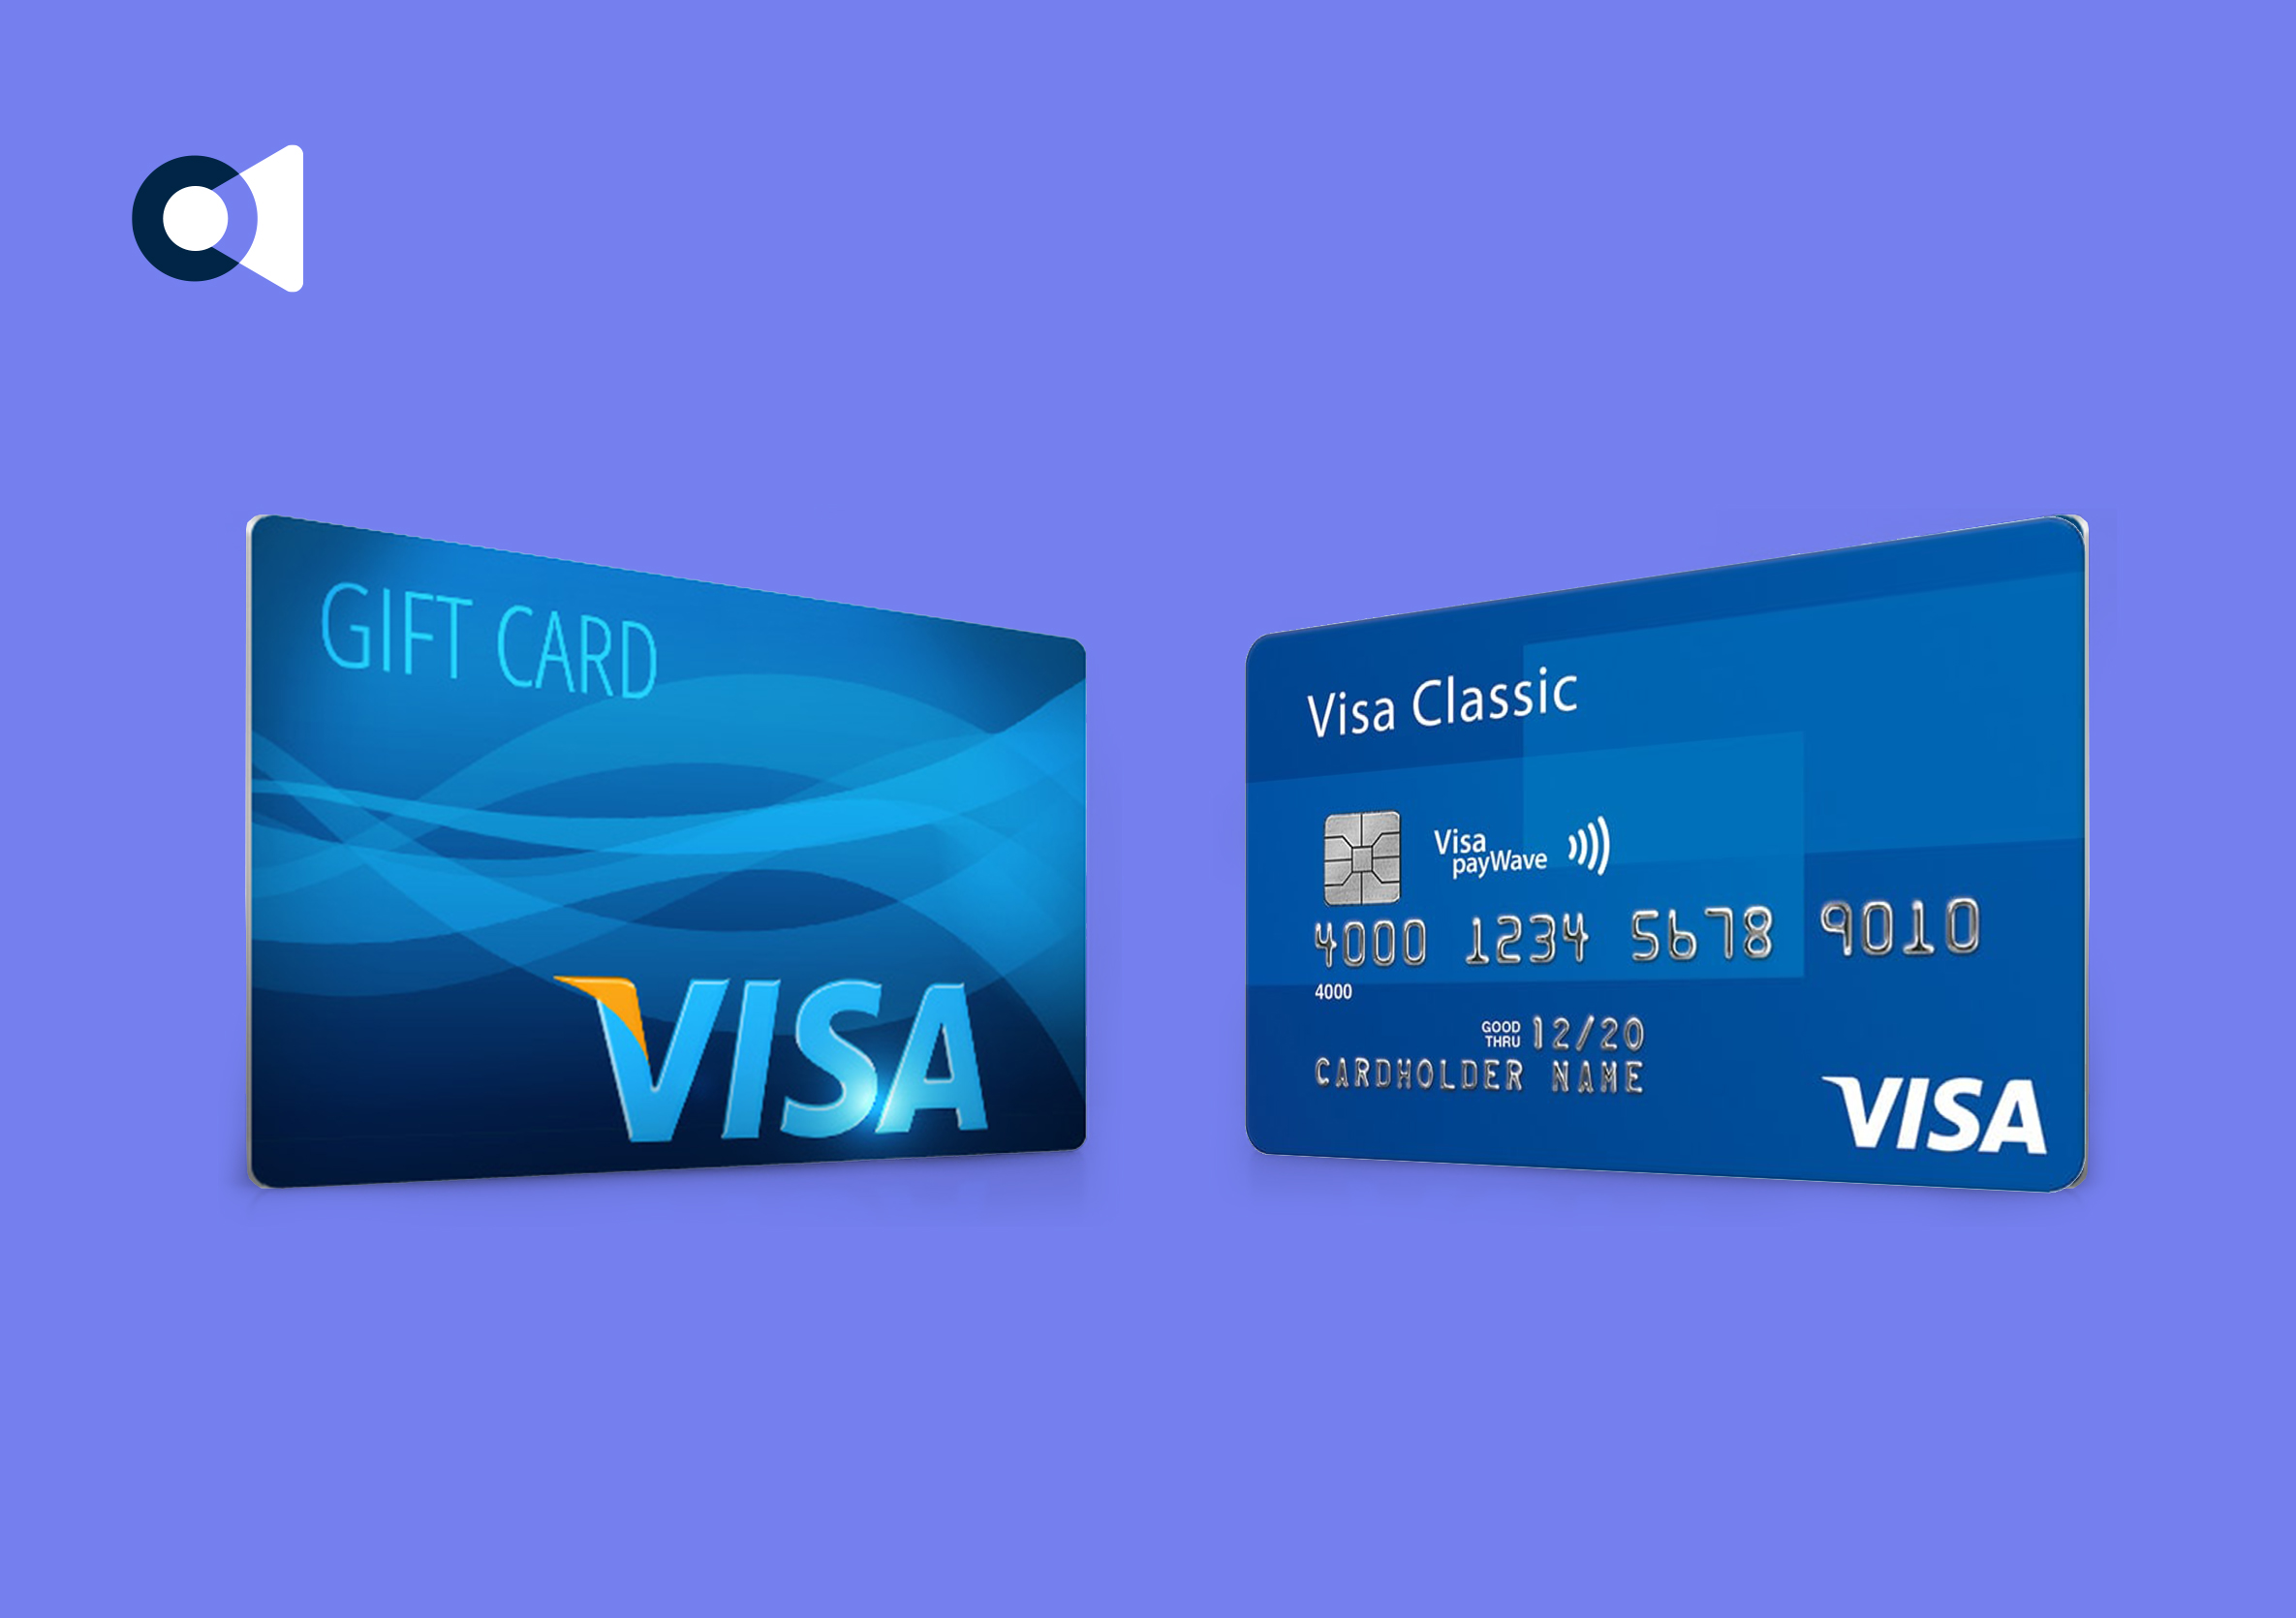 What is the difference between a Visa Gift Card and a Visa Debit Card